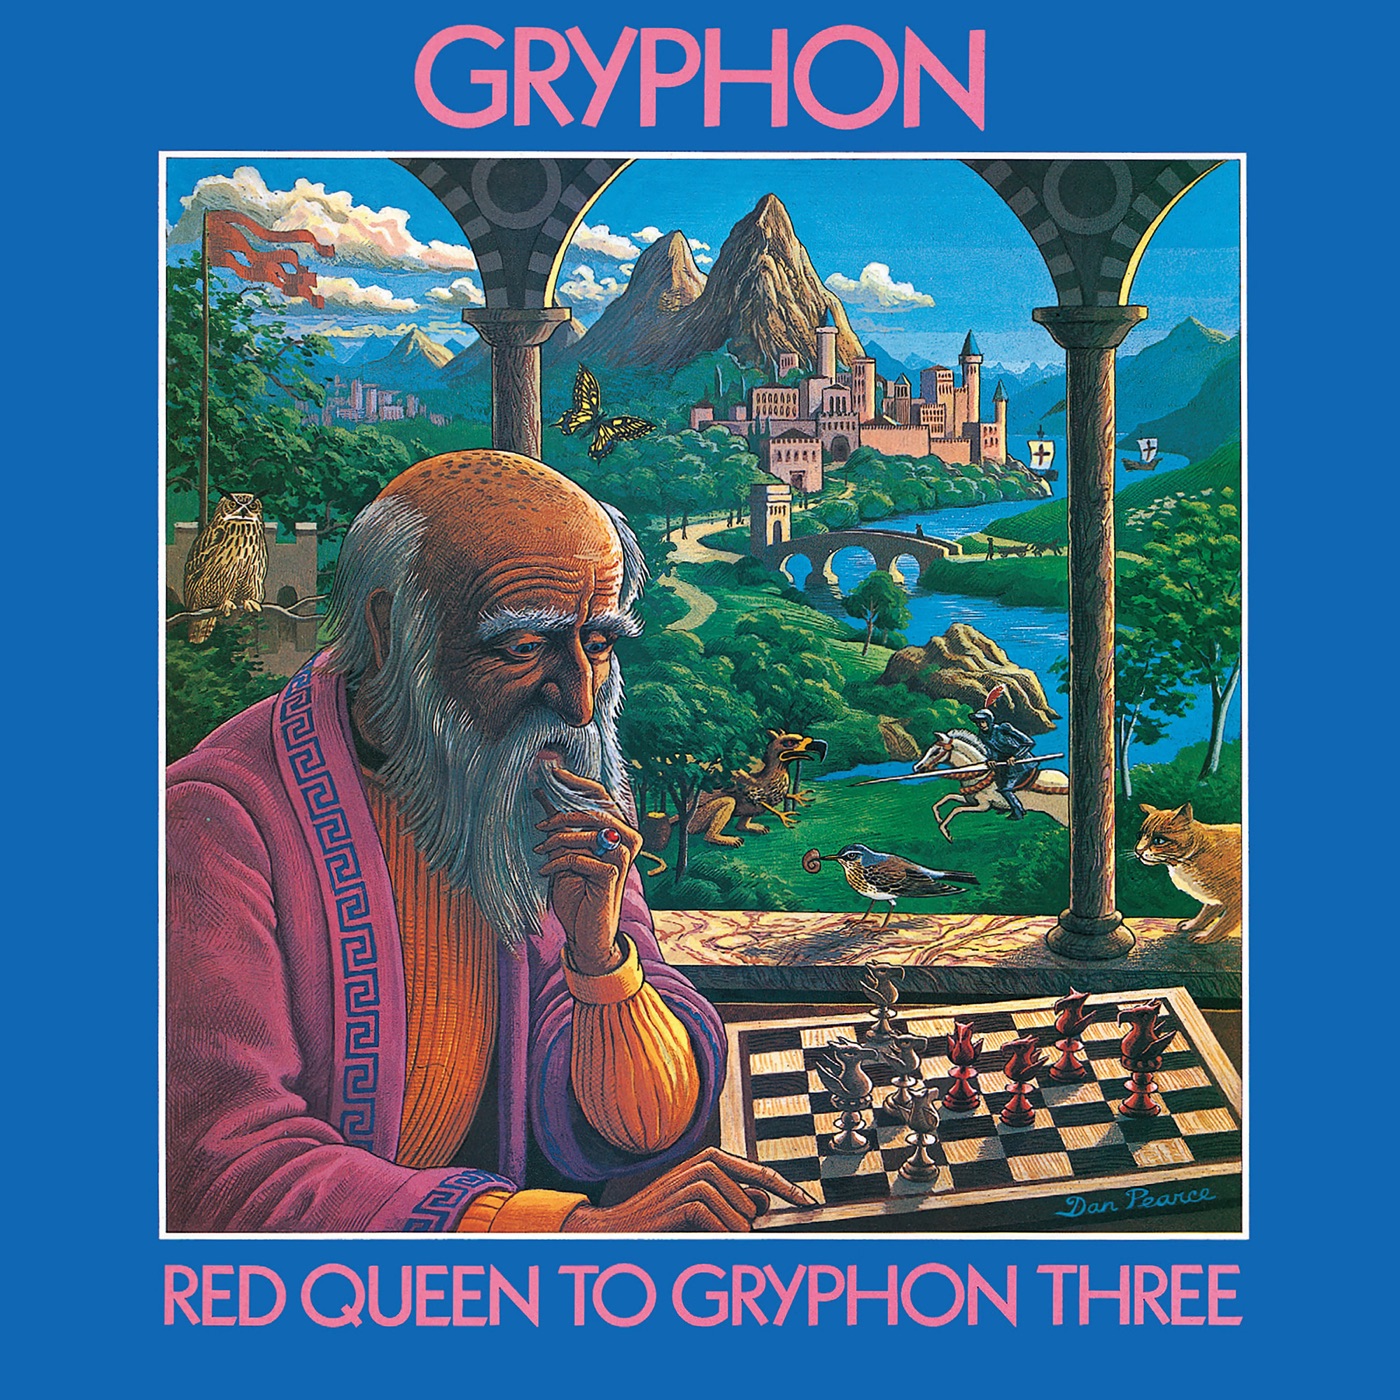 Red Queen to Gryphon Three by Gryphon